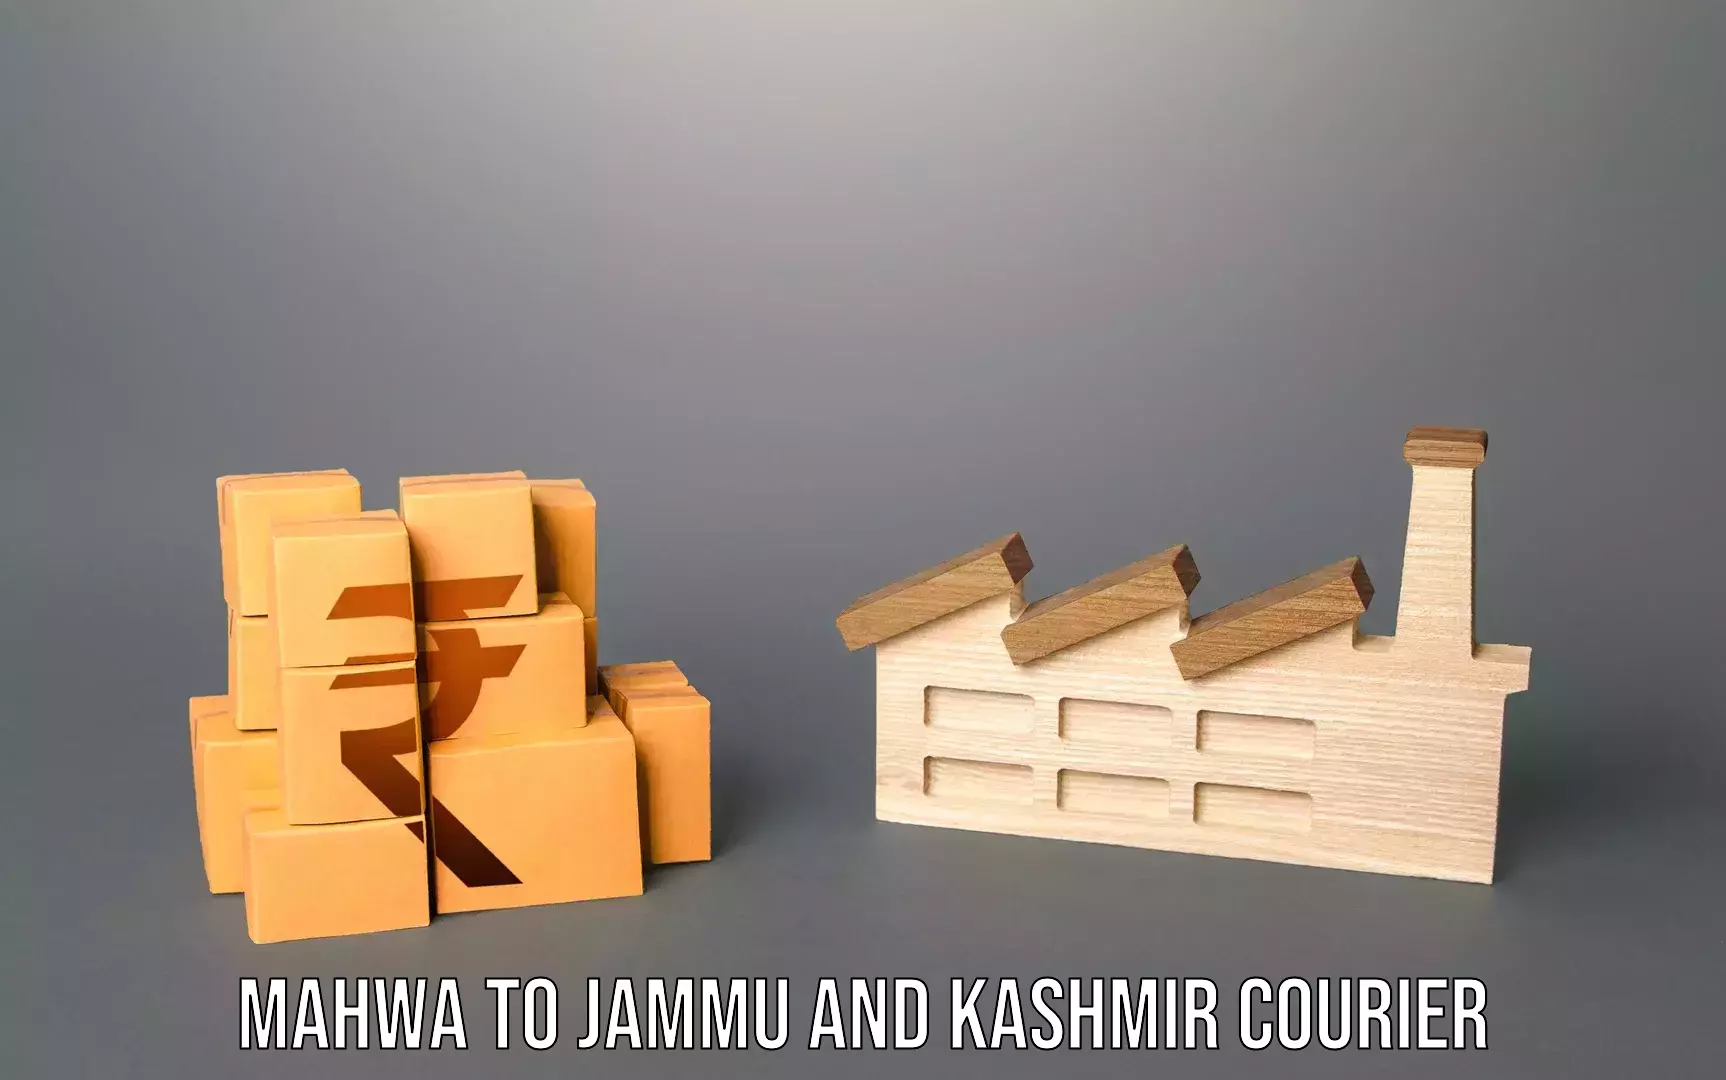 Luggage transport consultancy Mahwa to Jammu and Kashmir